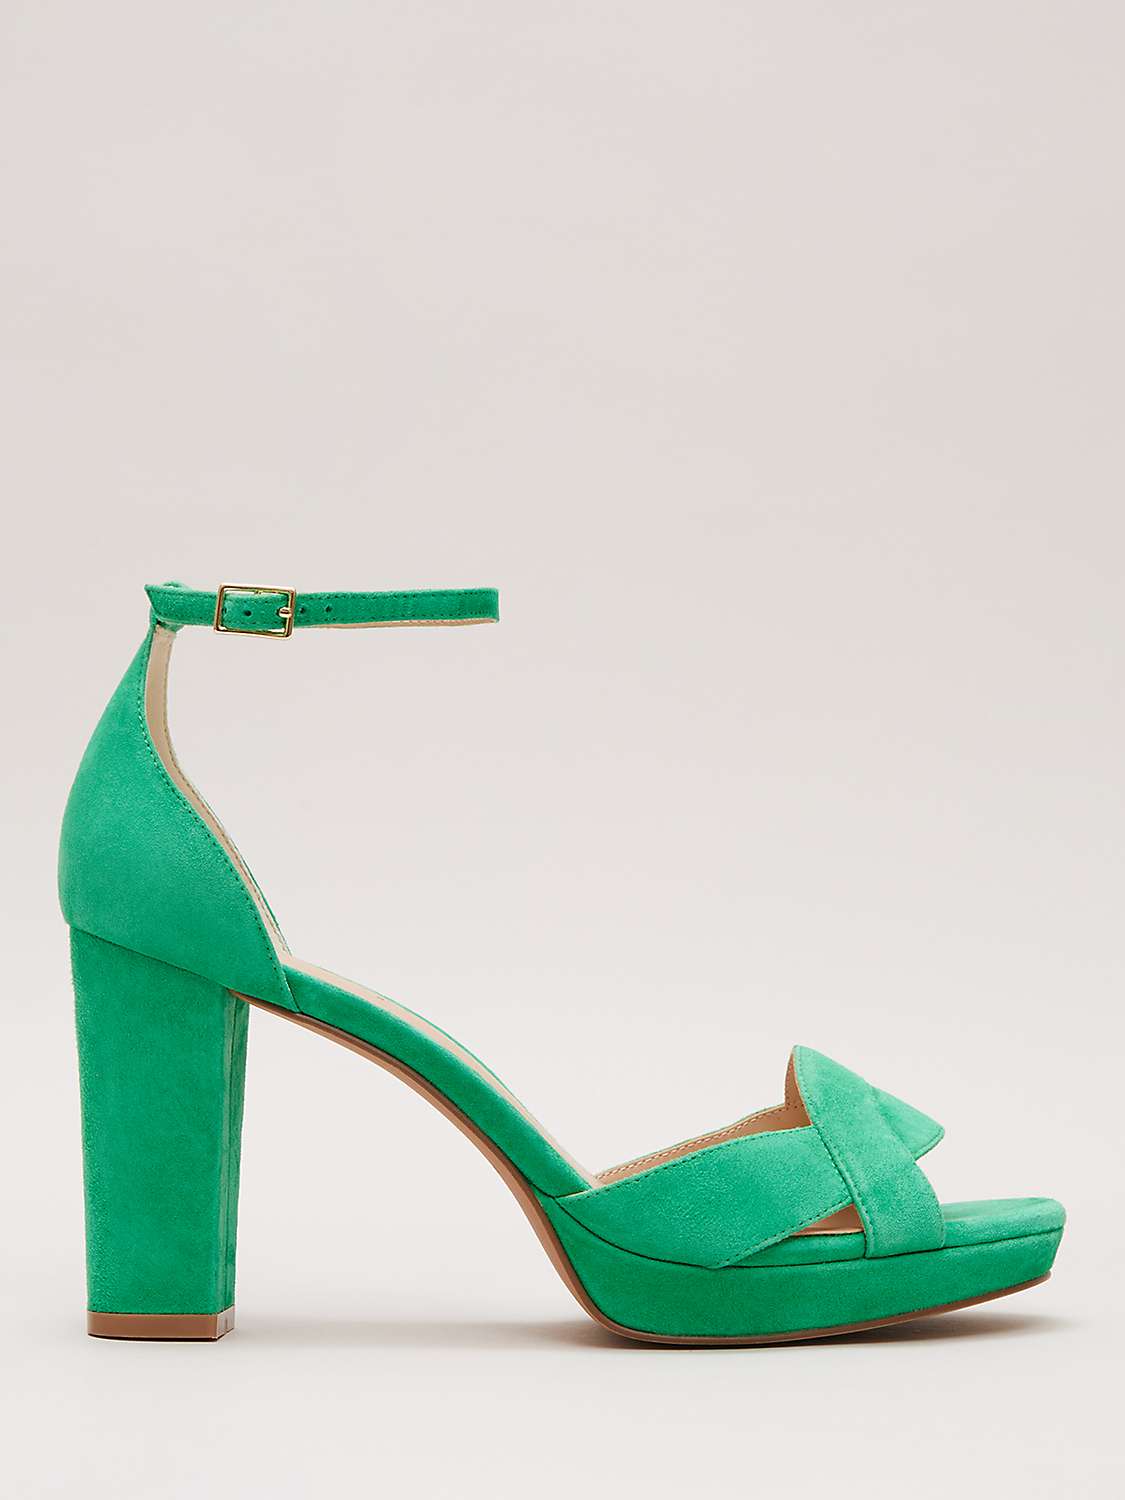 Buy Phase Eight Suede Crossover Platform Sandals, Green Online at johnlewis.com